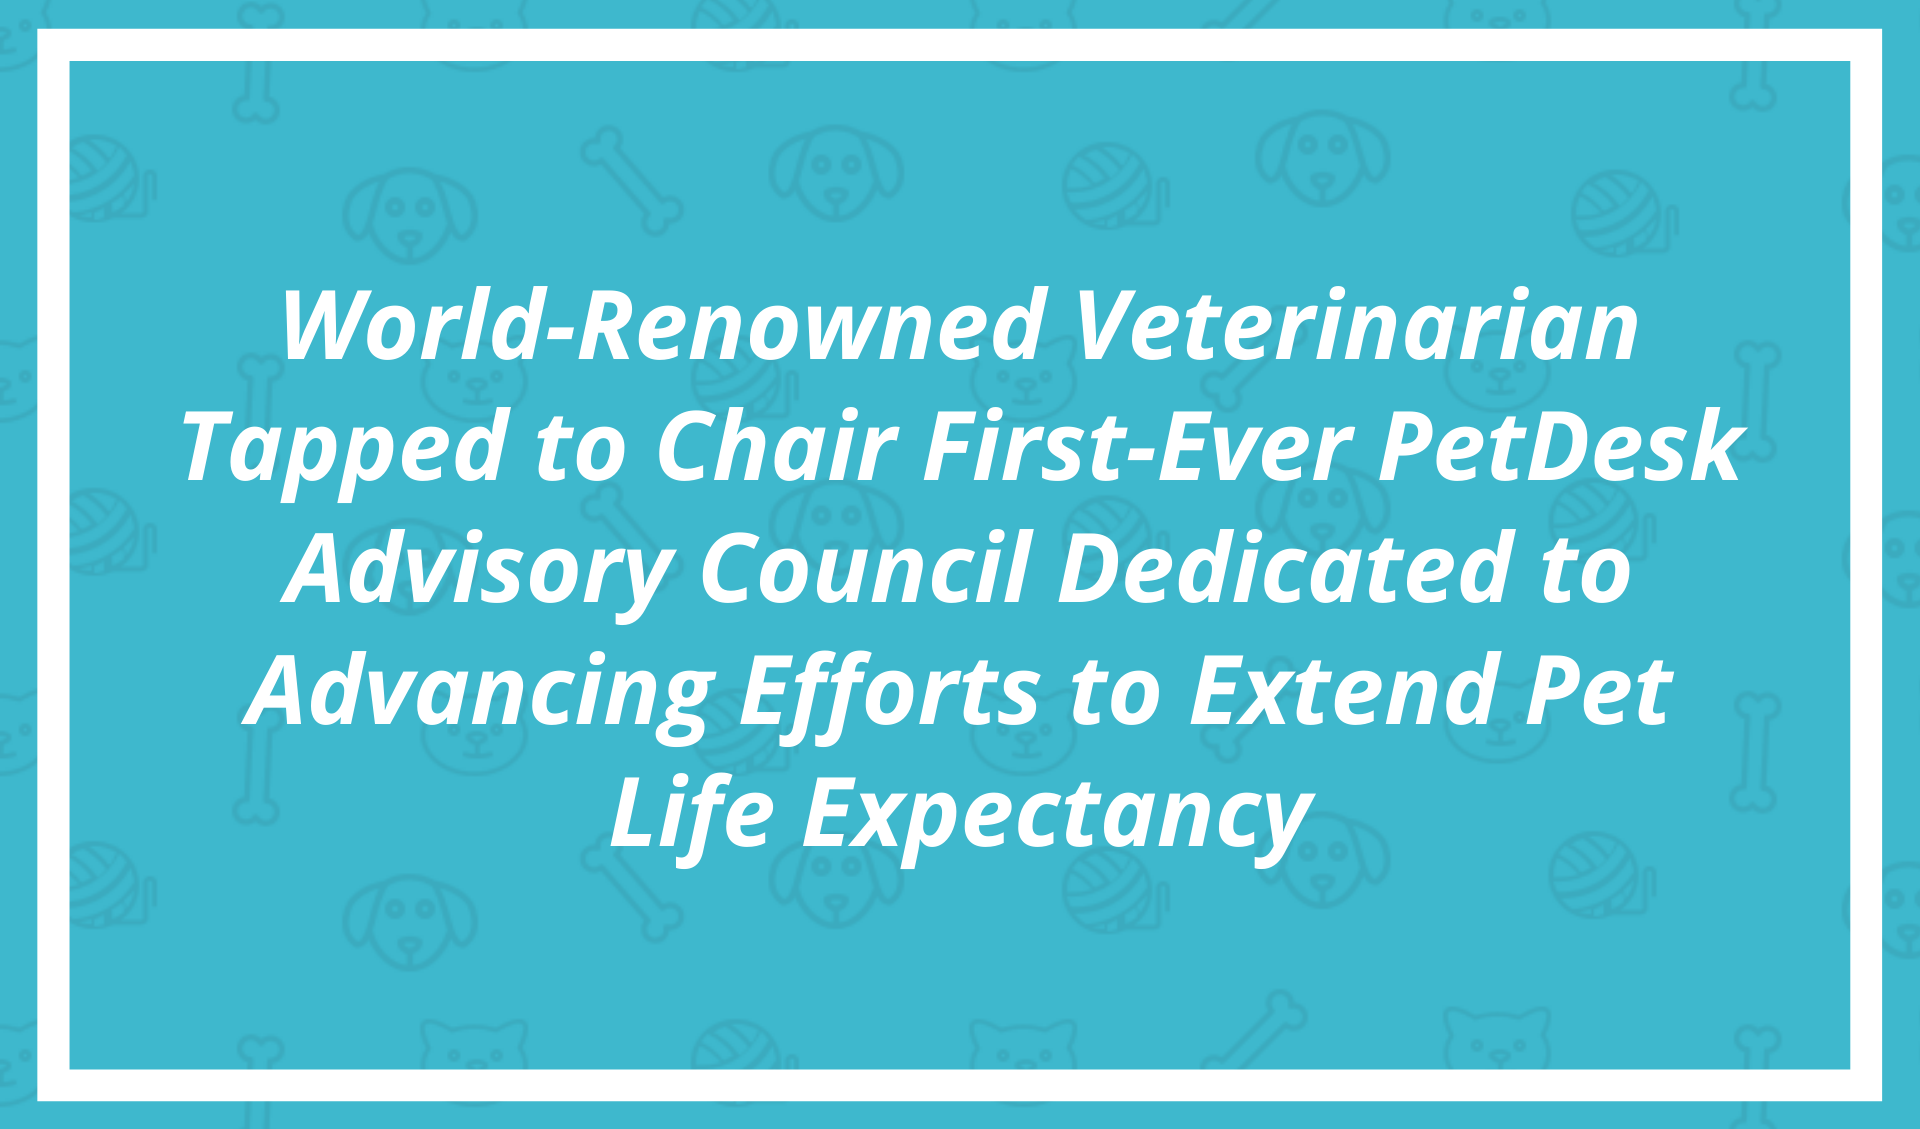 World-Renowned Veterinarian Tapped to Chair First-Ever PetDesk Advisory Council Dedicated to Advancing Efforts to Extend Pet Life Expectancy